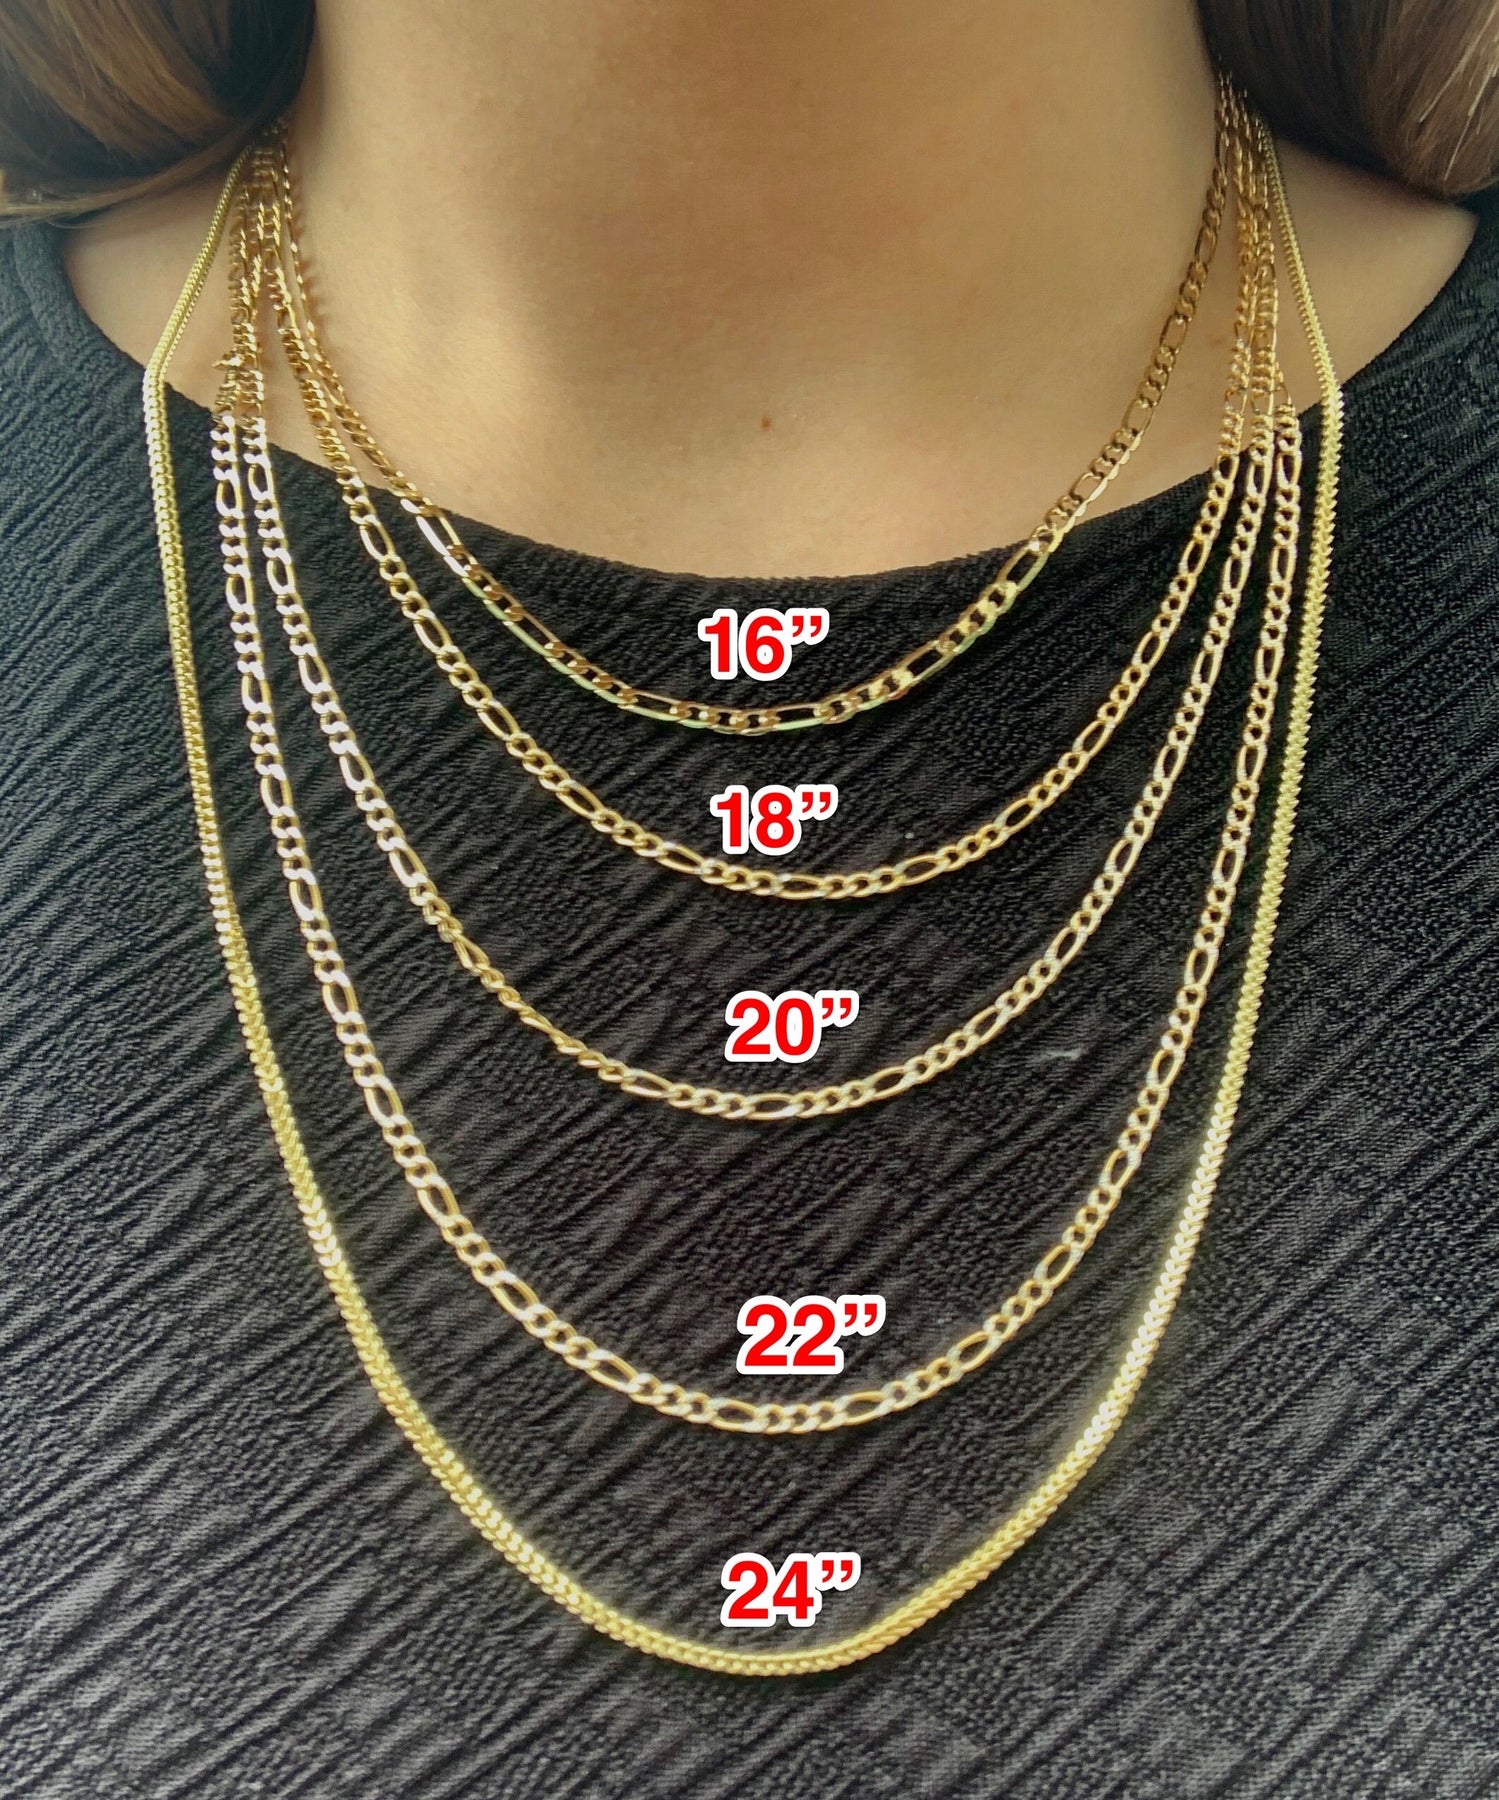 Mens 14k Solid Yellow Gold Cuban Link Chain Necklace 24, 4.5 mm